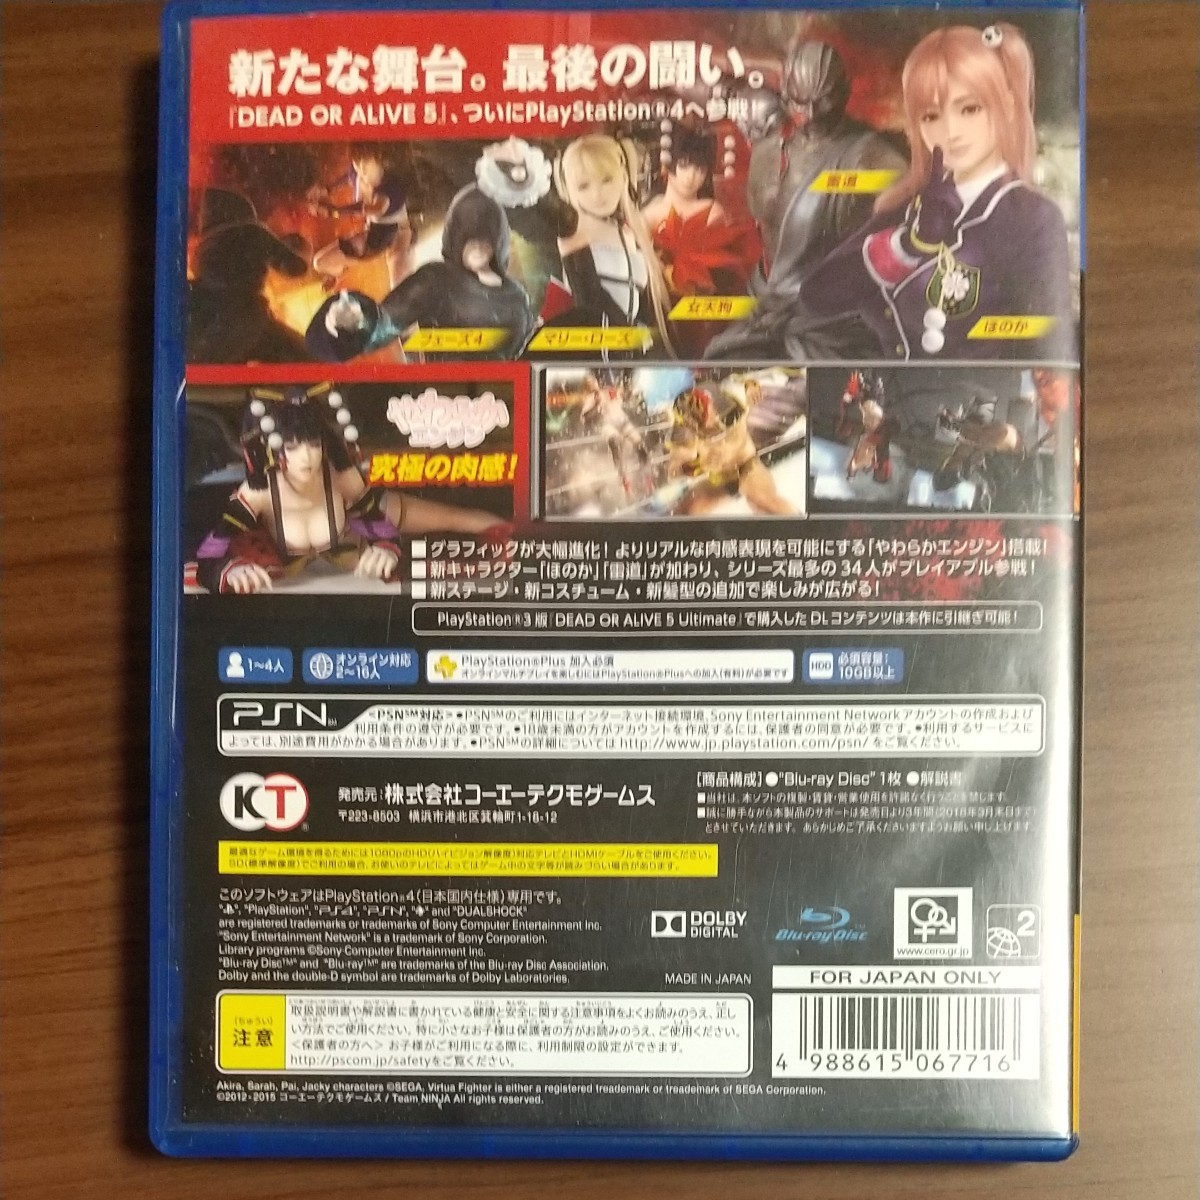 【PS4】 DEAD OR ALIVE 5 Last Round [通常版］